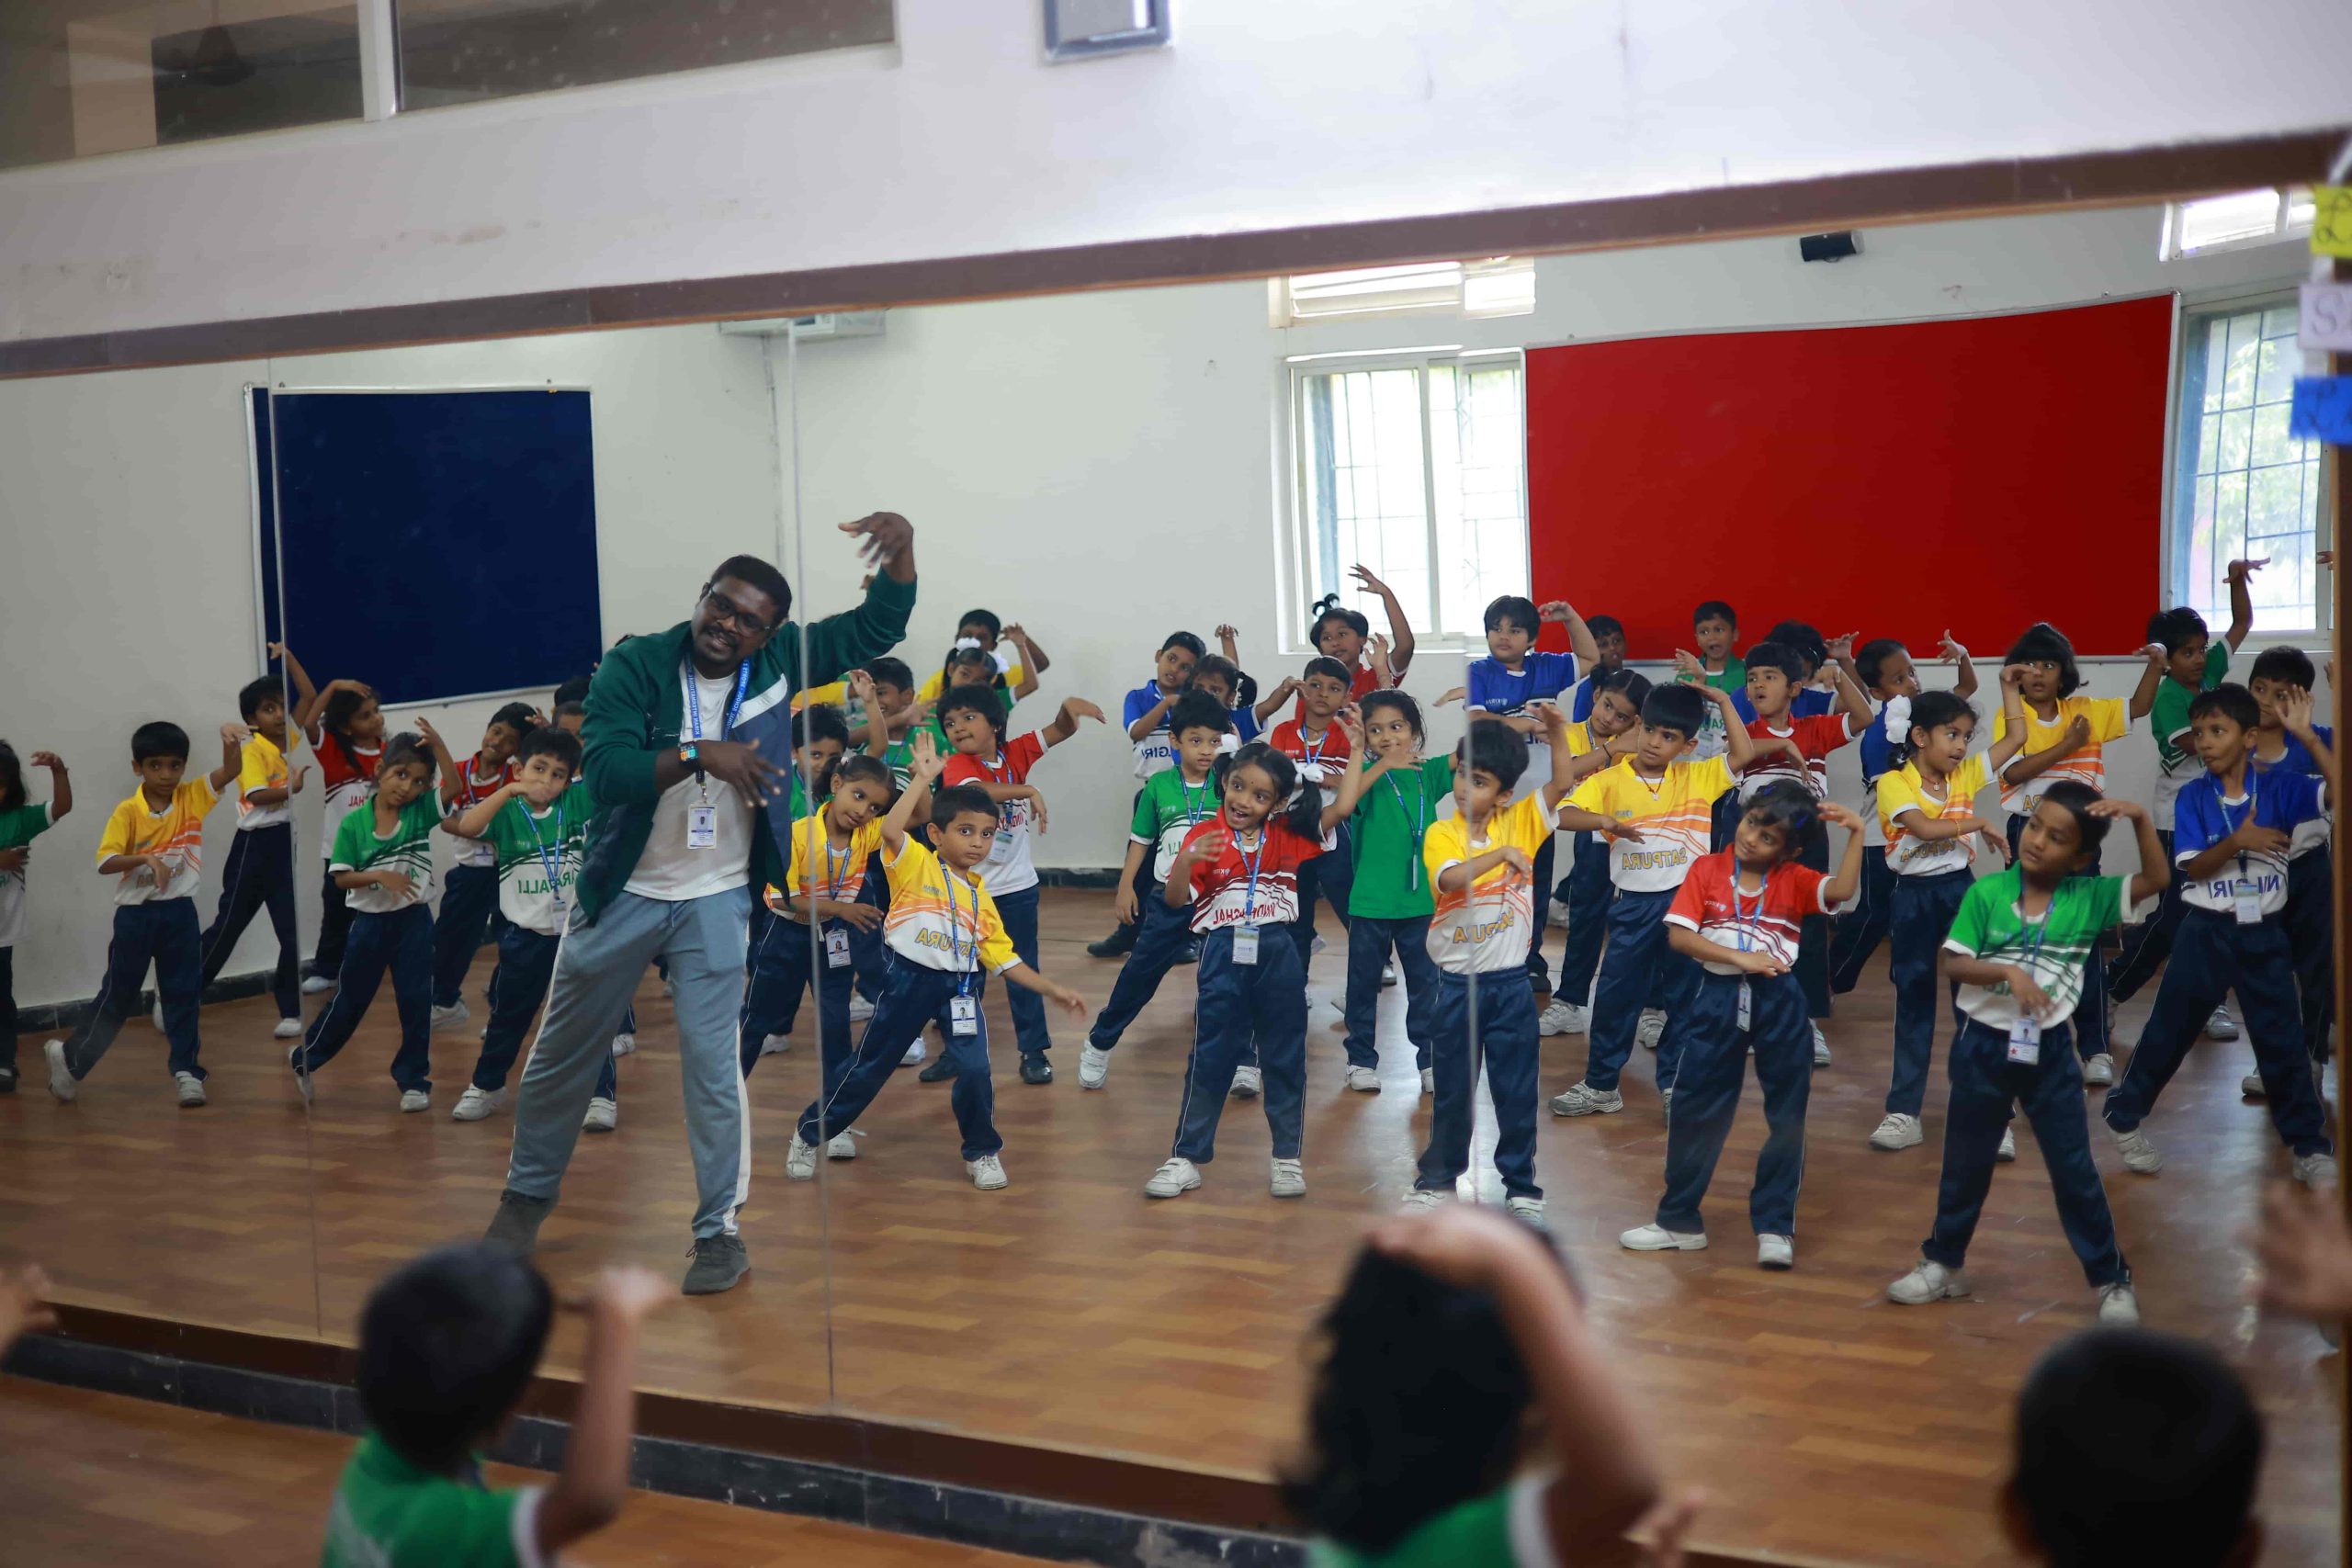 Energetic students dancing in the dance room at Kiran International School, featuring a one-sided mirror facility for enhanced learning and self-reflection during dance sessions.